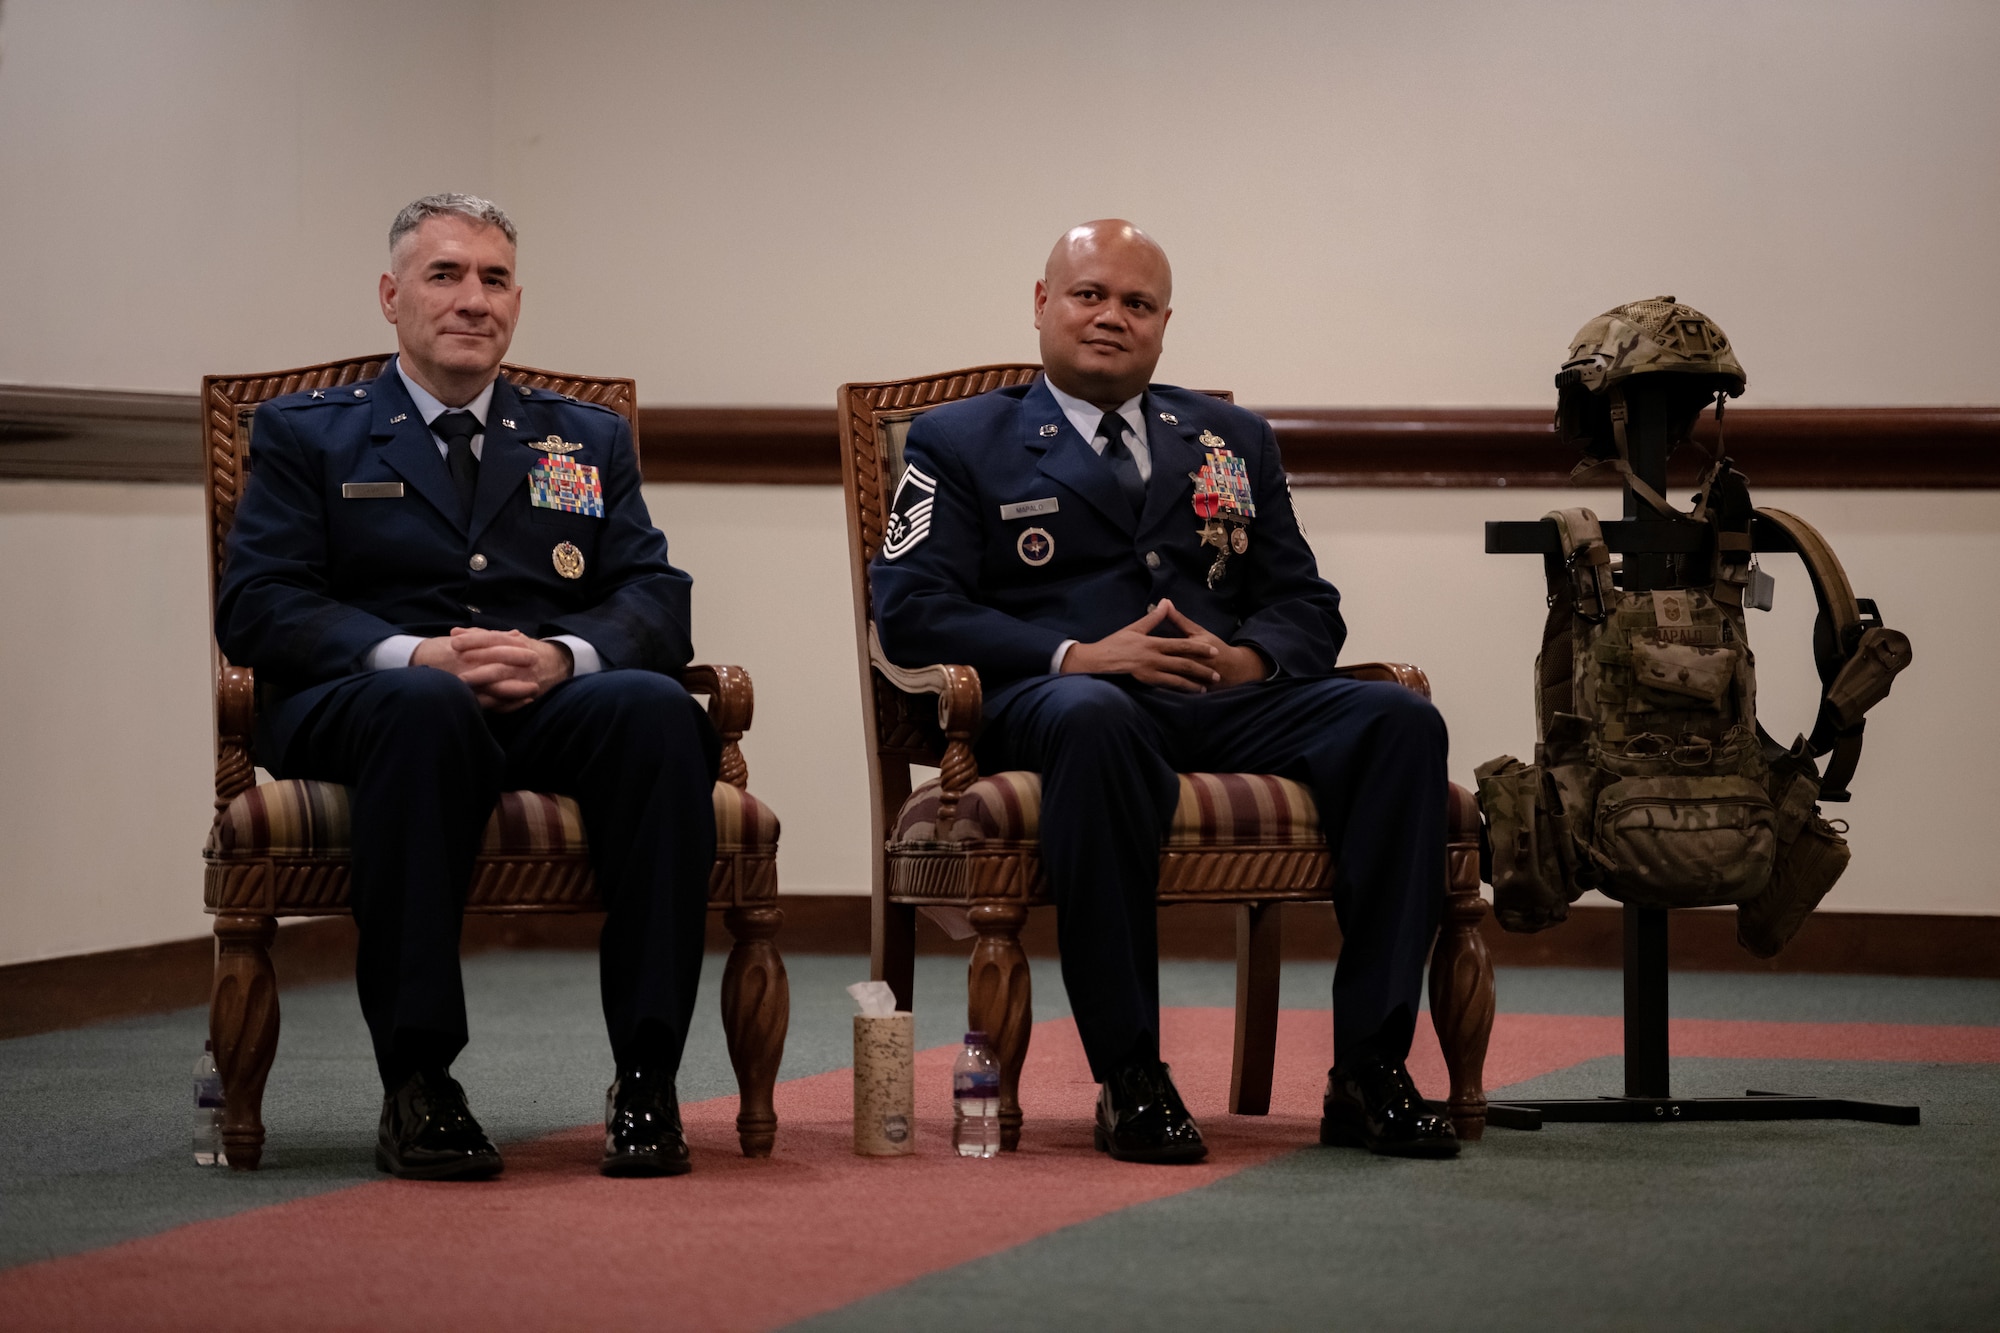 U.S. Air Force Brig. Gen. Joseph Campo, 48th Fighter Wing commander, and Senior Master Sgt. Jeremy Mapalo, 48th Security Forces Squadron operations superintendent, sit side by side during a Bronze Star presentation ceremony.